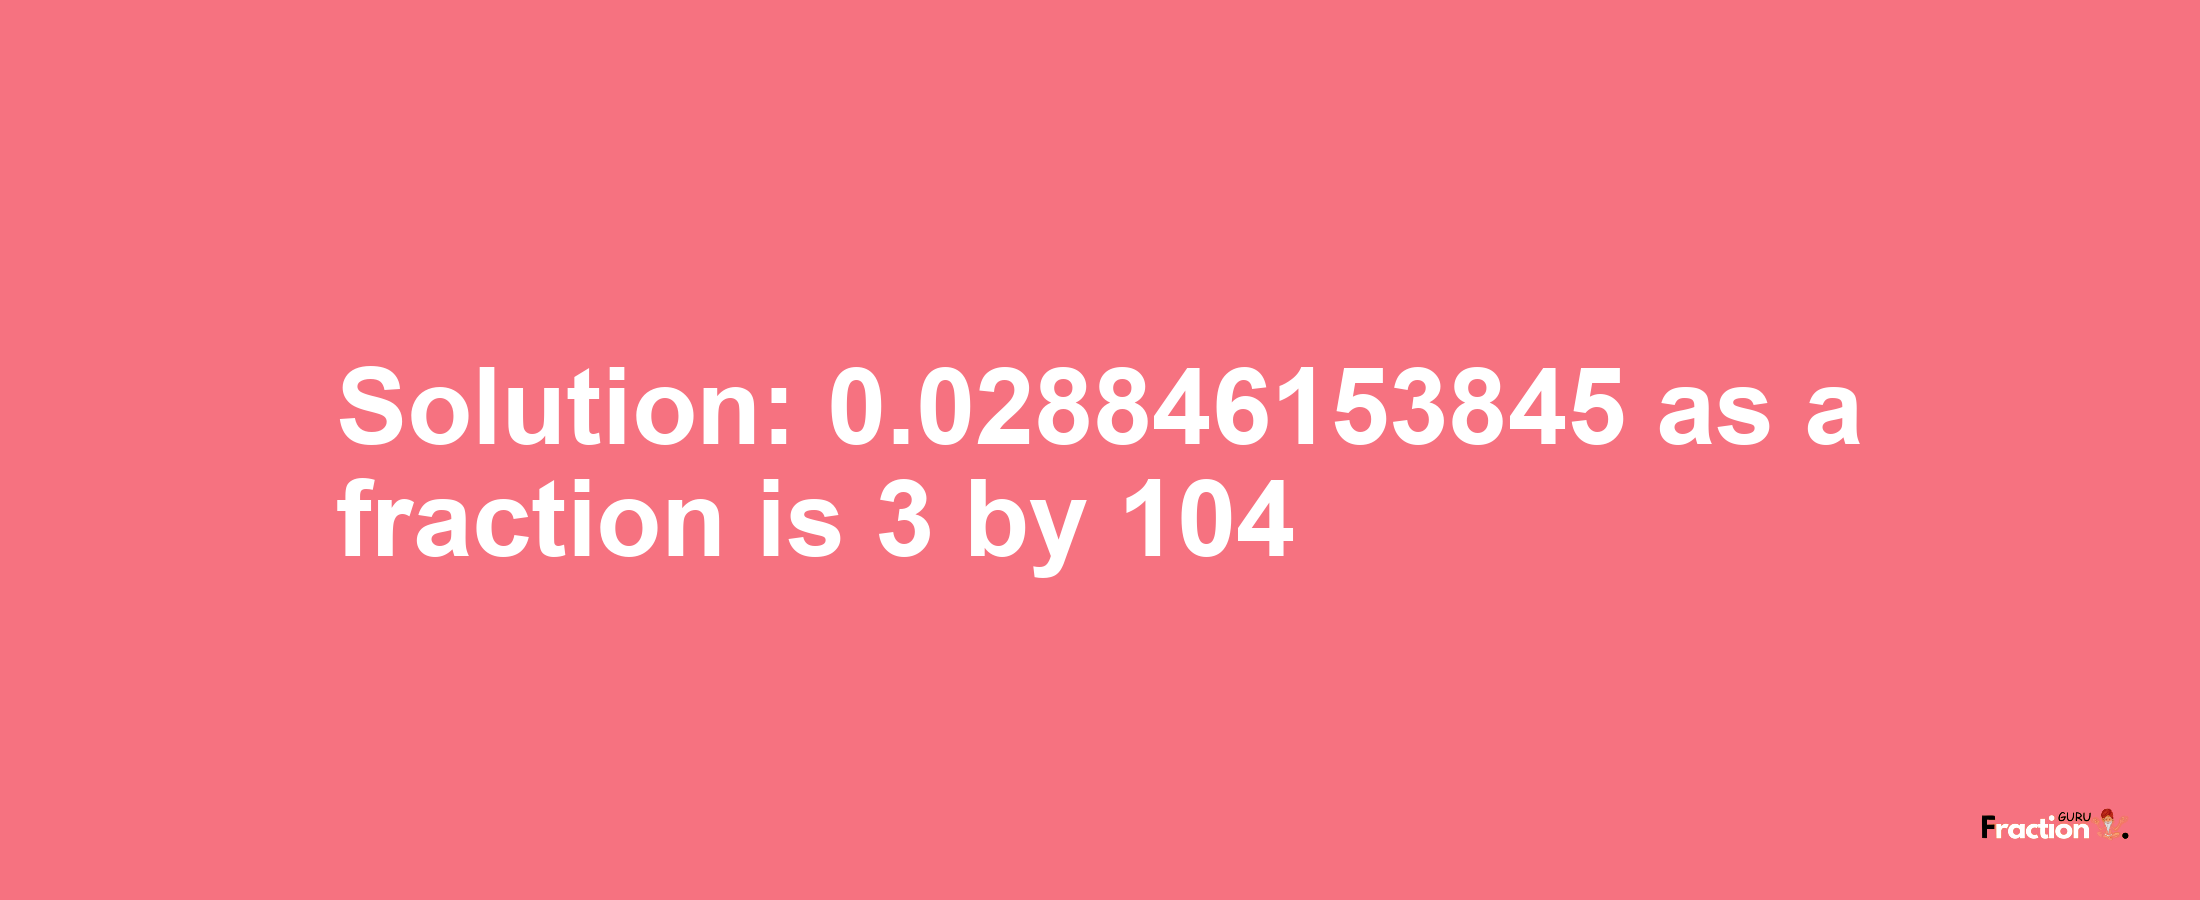 Solution:0.028846153845 as a fraction is 3/104